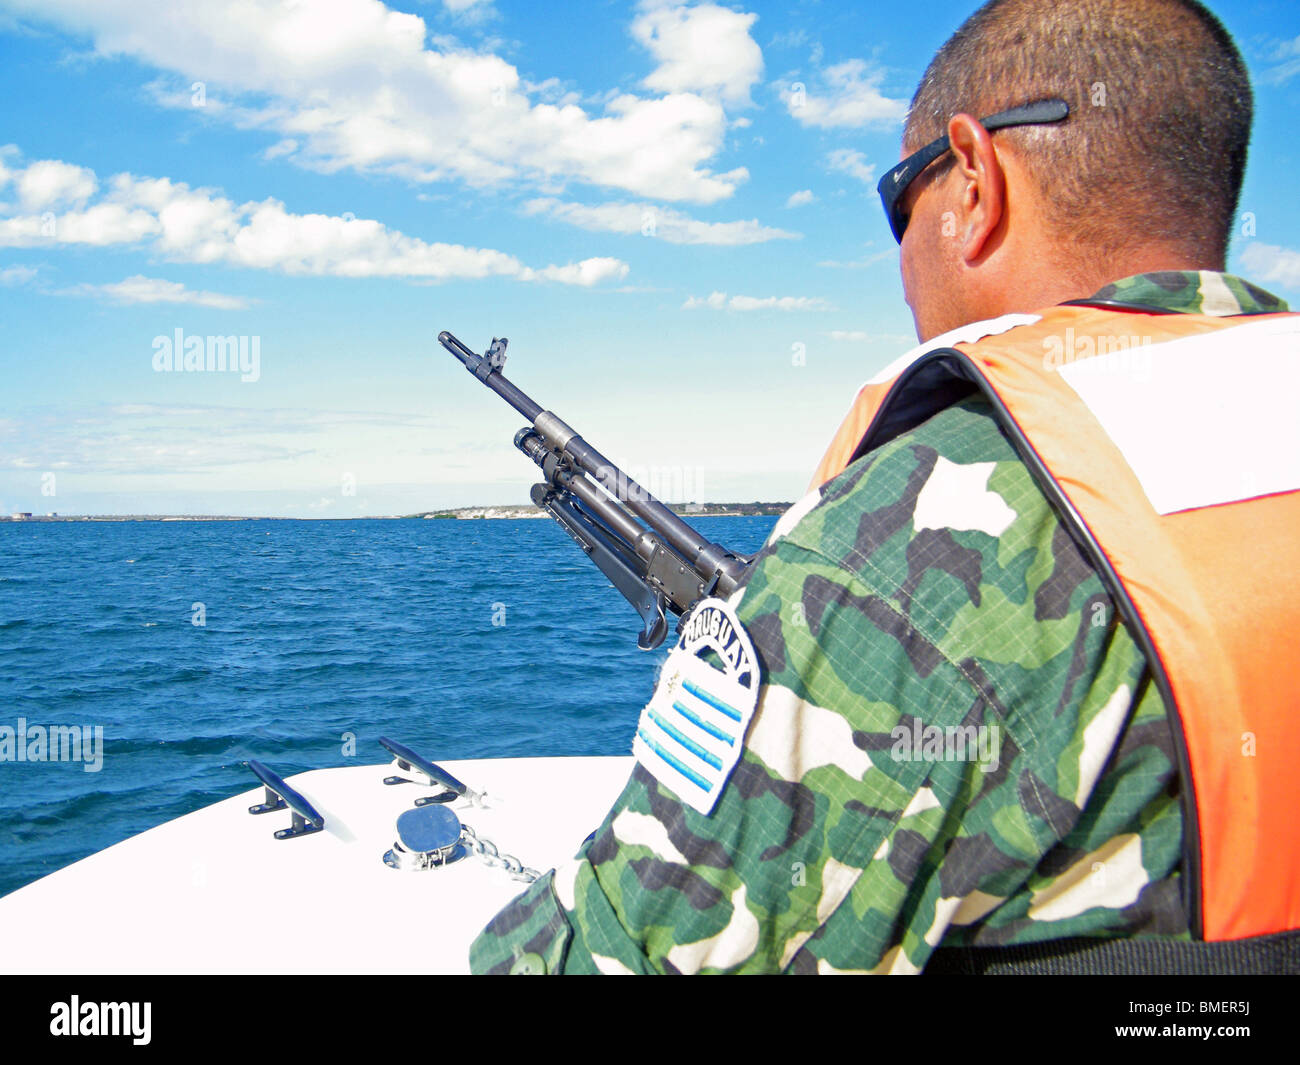 A United Nations peacekeeper mans a mounted gun at the bow of a patrol boat searching for drug traffickers, Fort Libertè, Haiti Stock Photo